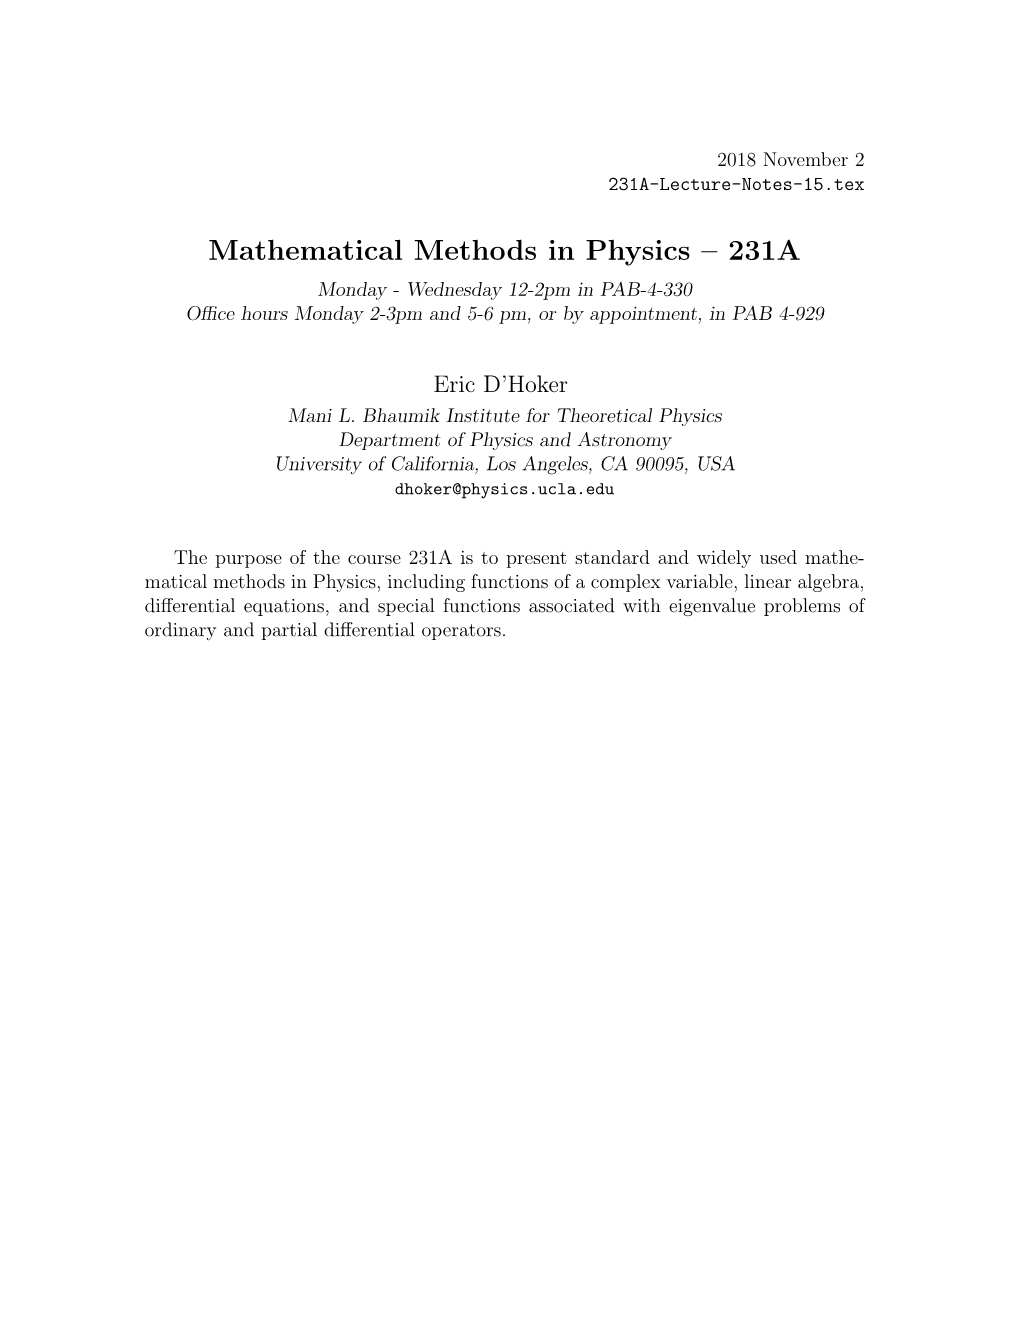 Mathematical Methods in Physics – 231A Monday - Wednesday 12-2Pm in PAB-4-330 Oﬃce Hours Monday 2-3Pm and 5-6 Pm, Or by Appointment, in PAB 4-929